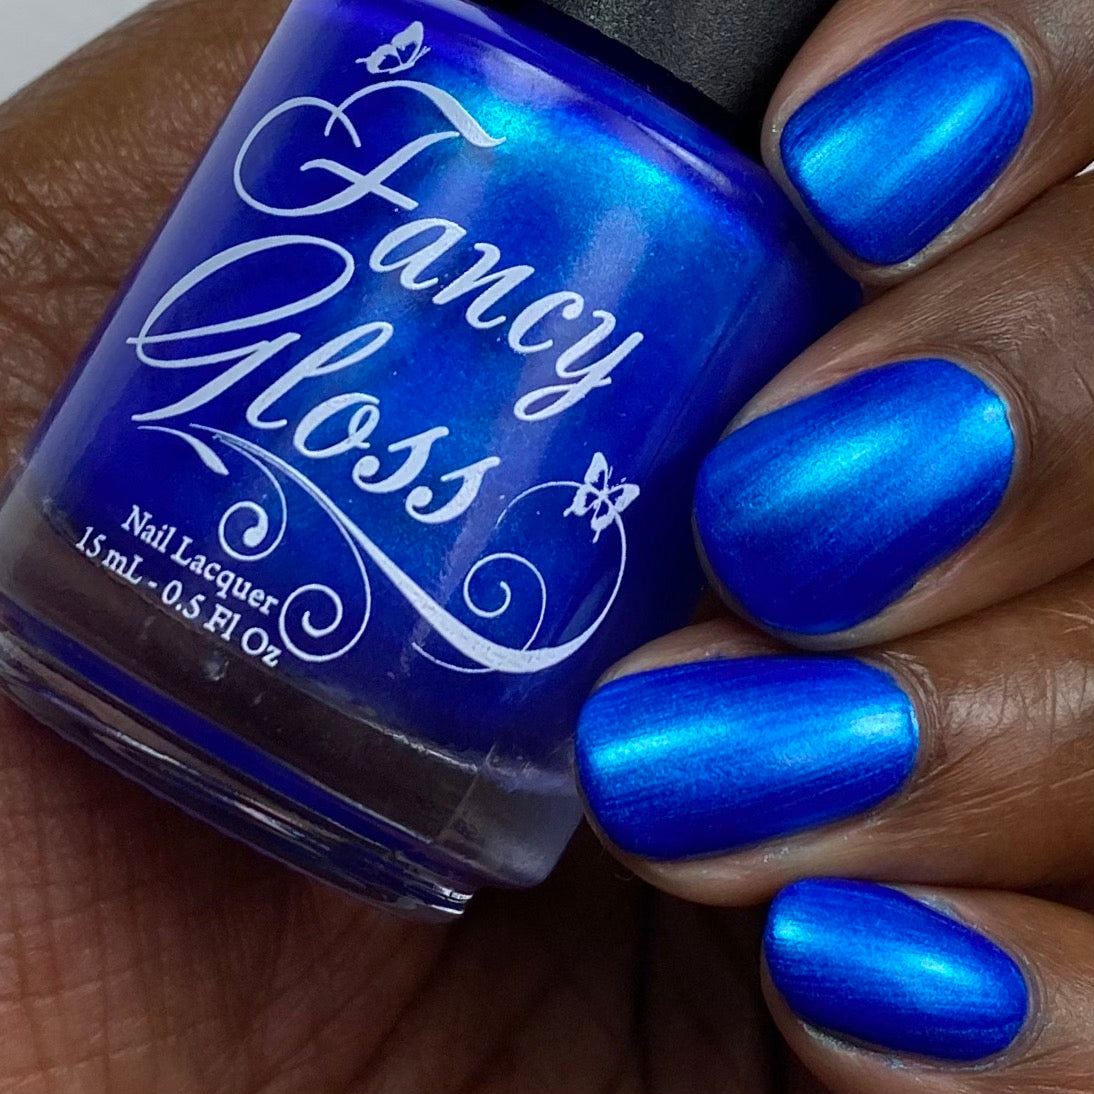 Buy NUGEL | NON UV GEL | SHIMMER | NAIL ENAMEL 13ML (DIAMOND ELECTRIC BLUE  - S02) Online at Low Prices in India - Amazon.in